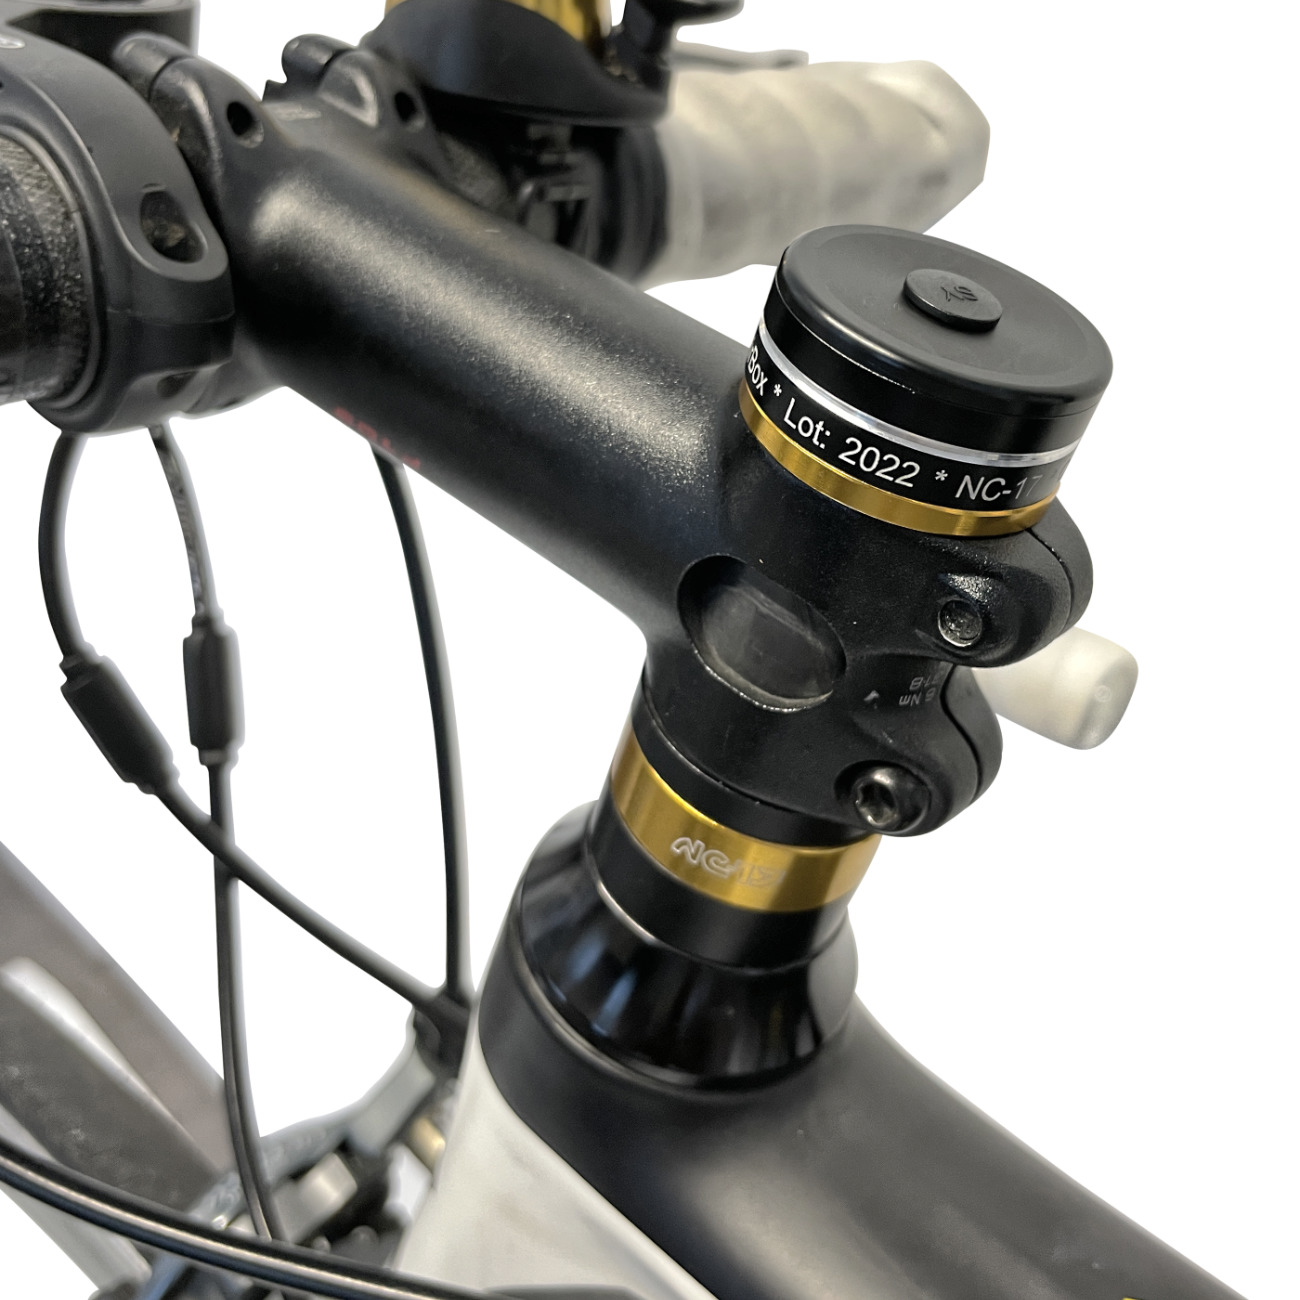 NC-17 - Connect AirBox - Support vélo pour Apple Airtag